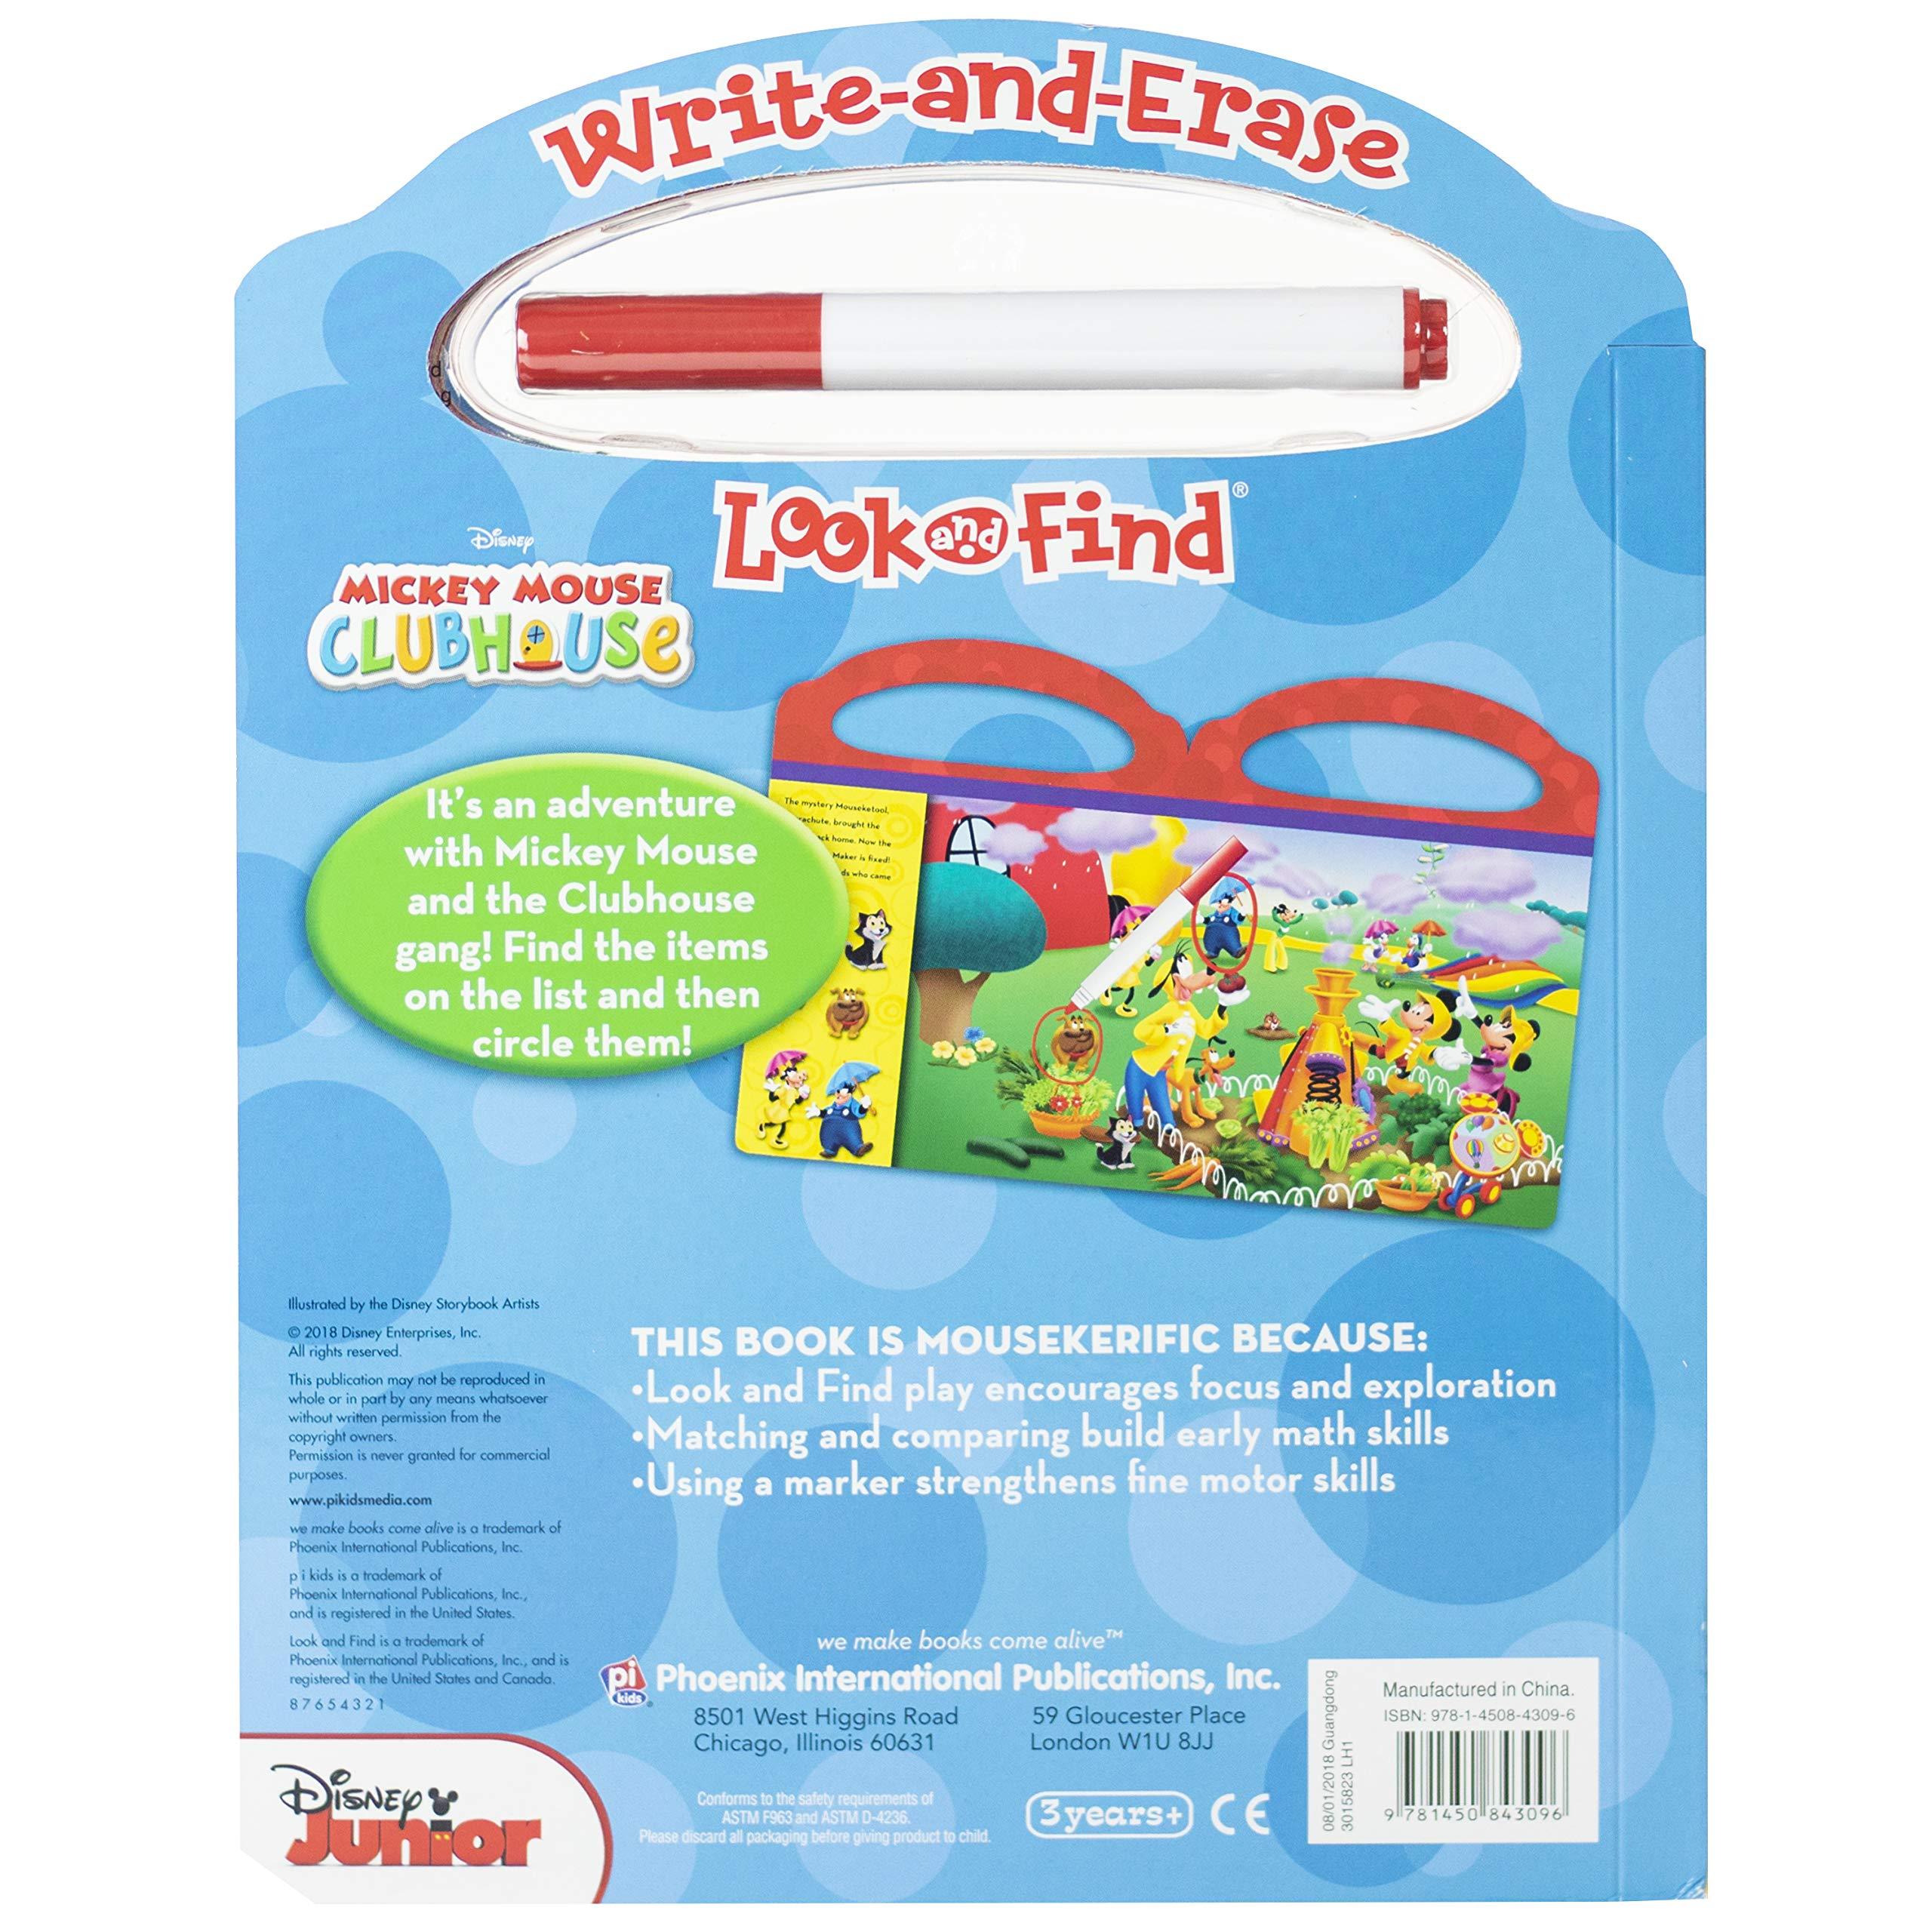 Mickey Mouse Clubhouse - Write-and-Erase Look and Find Wipe Clean Board - Ourkids - OKO